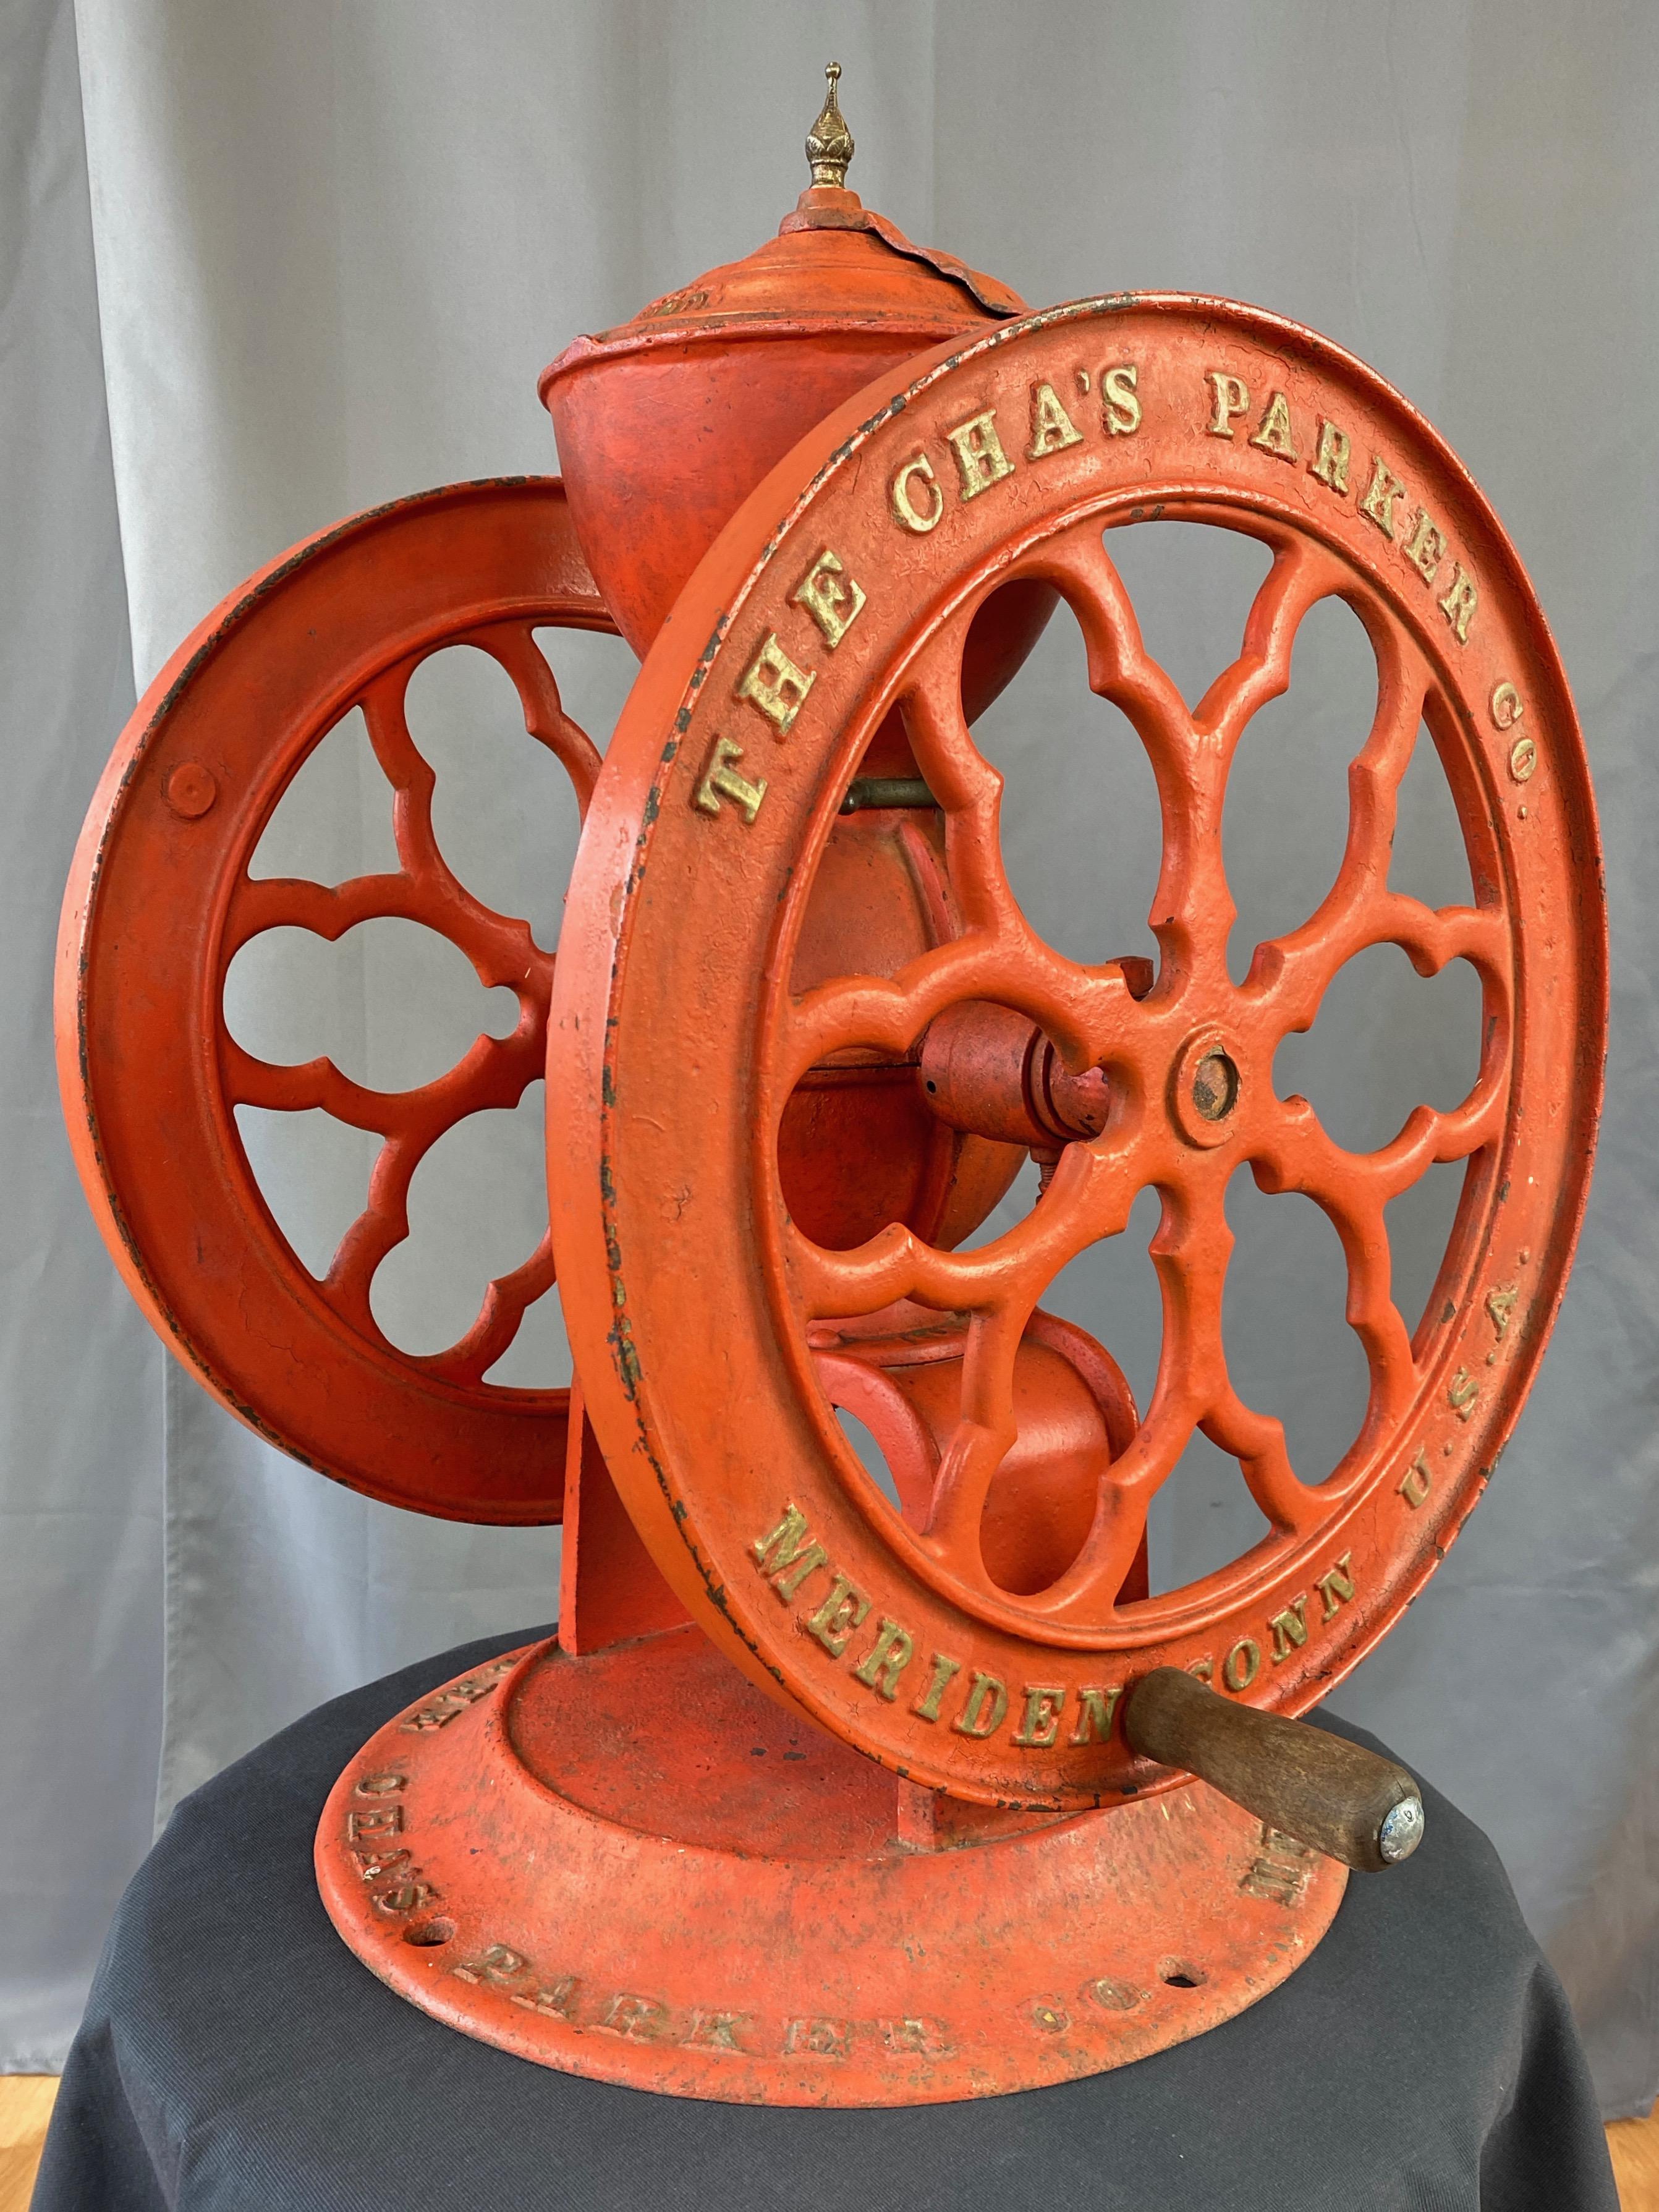 An impressive and less common single-color model No. 900 cast iron coffee mill or grinder by the Charles Parker Co. Patented in 1891, this example dates from later that decade.

Large and substantial 100 lb. cast iron design features dual 19.25 inch